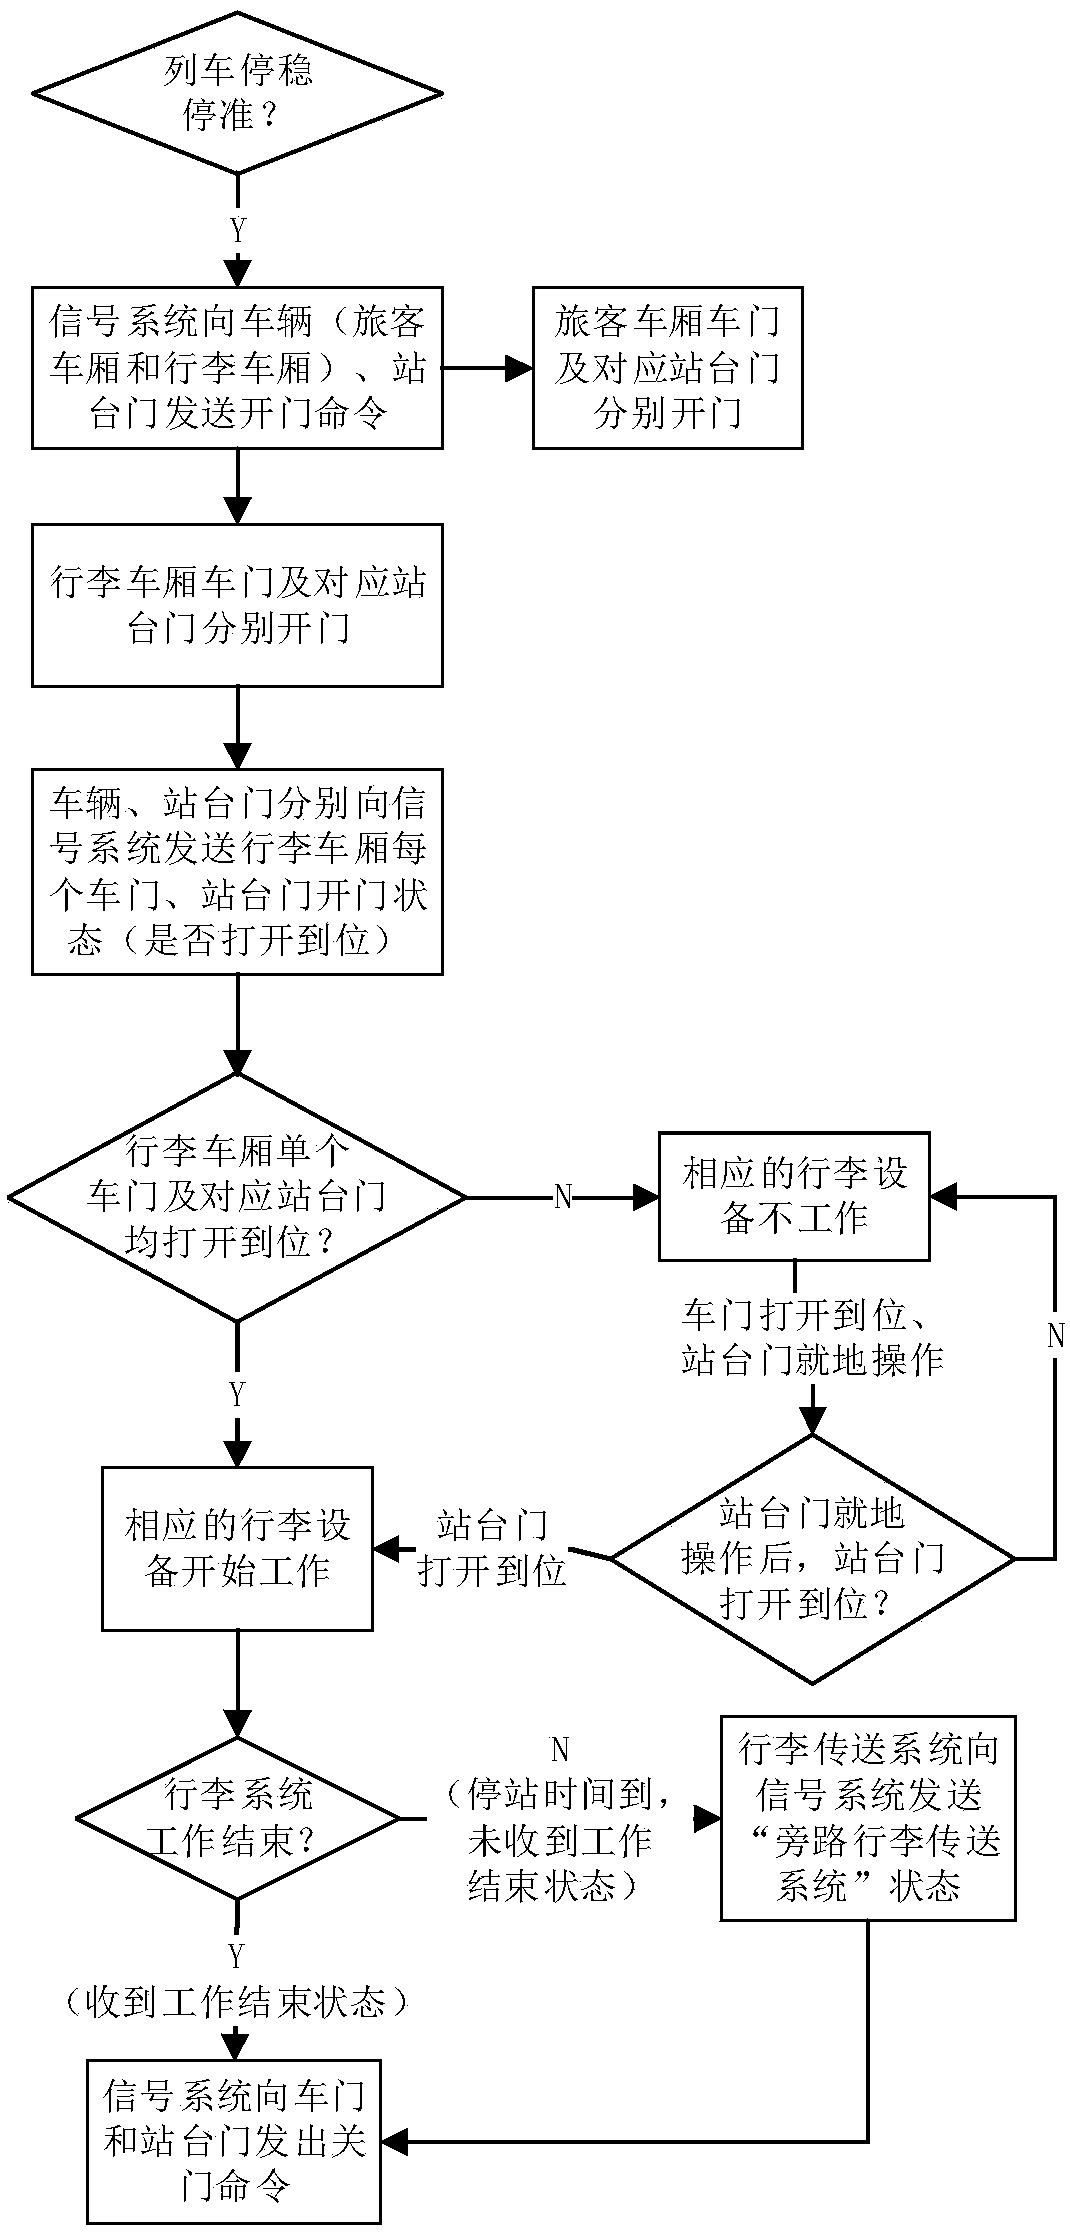 Automatic interaction method of a signal system and a luggage system of urban rail transit